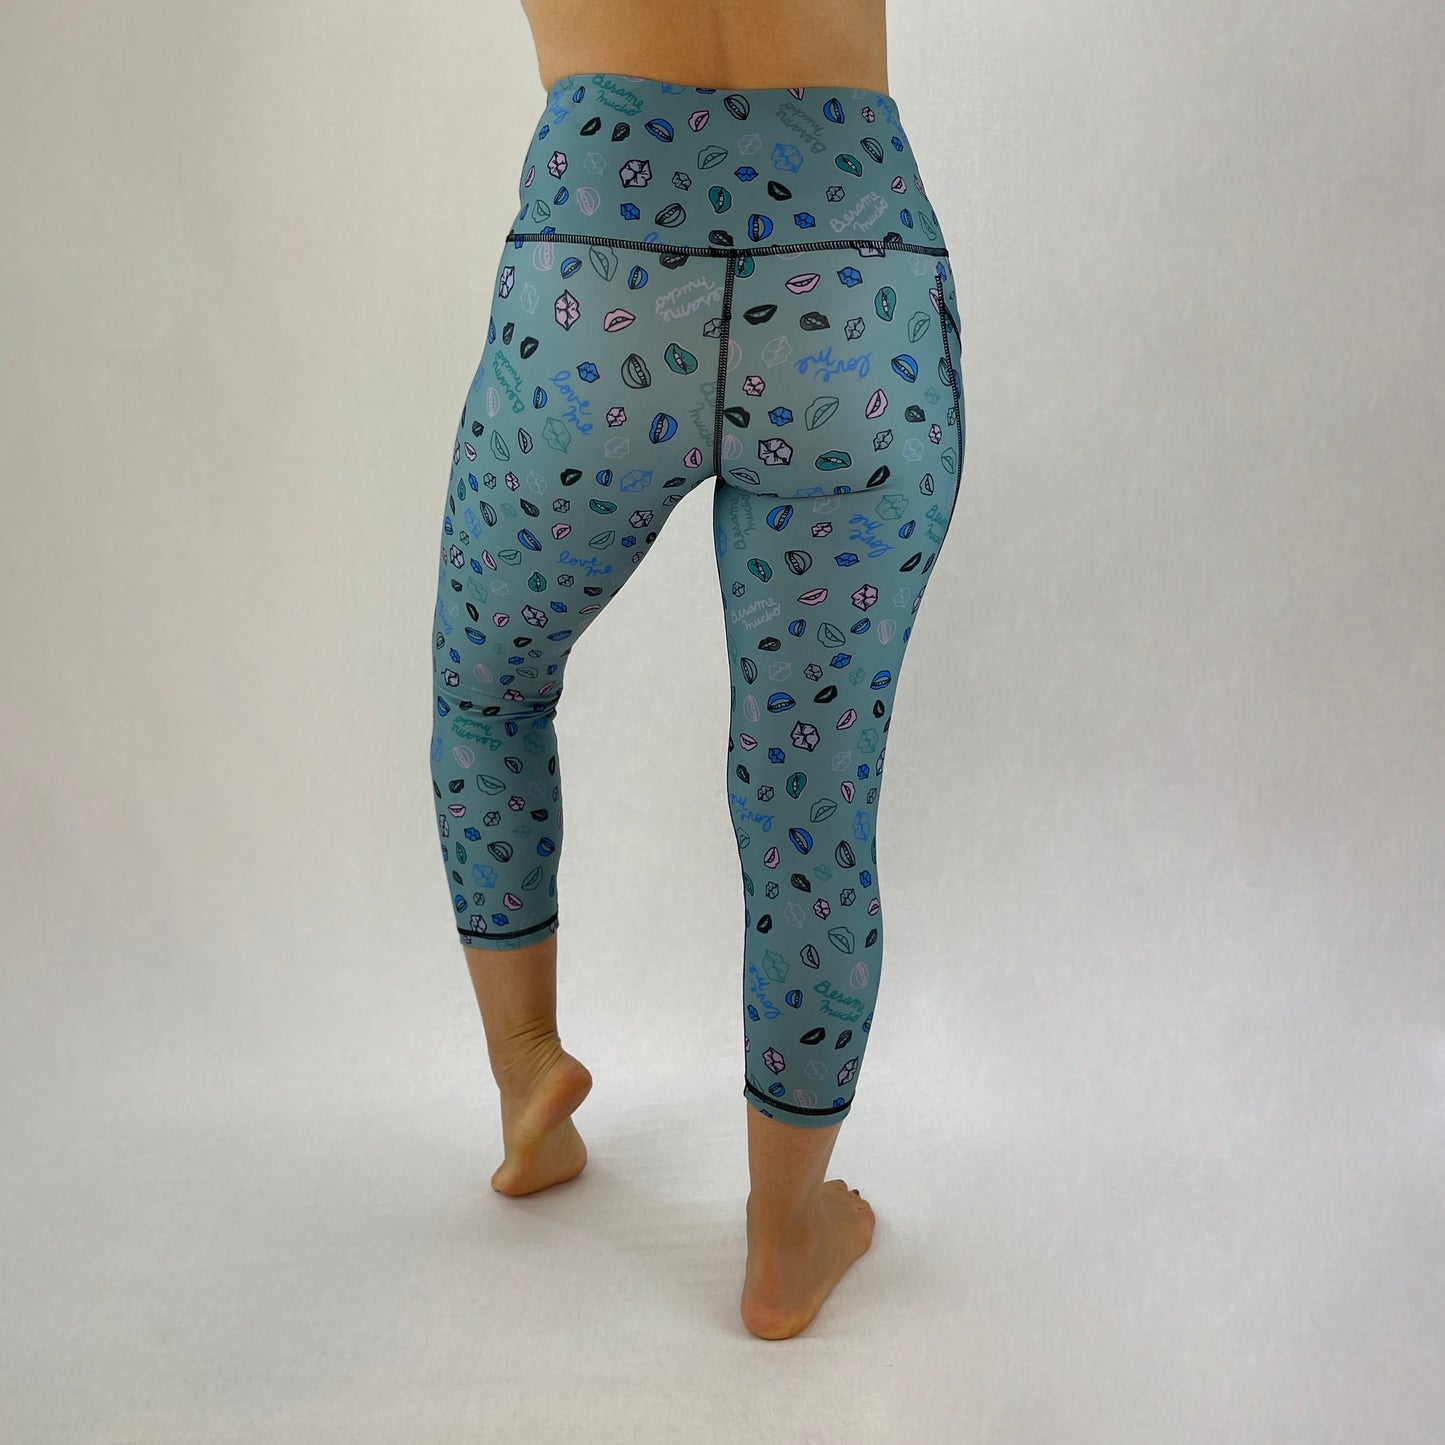 colourful high rise leggings with pockets made sustainably from recycled materials - lips kisses